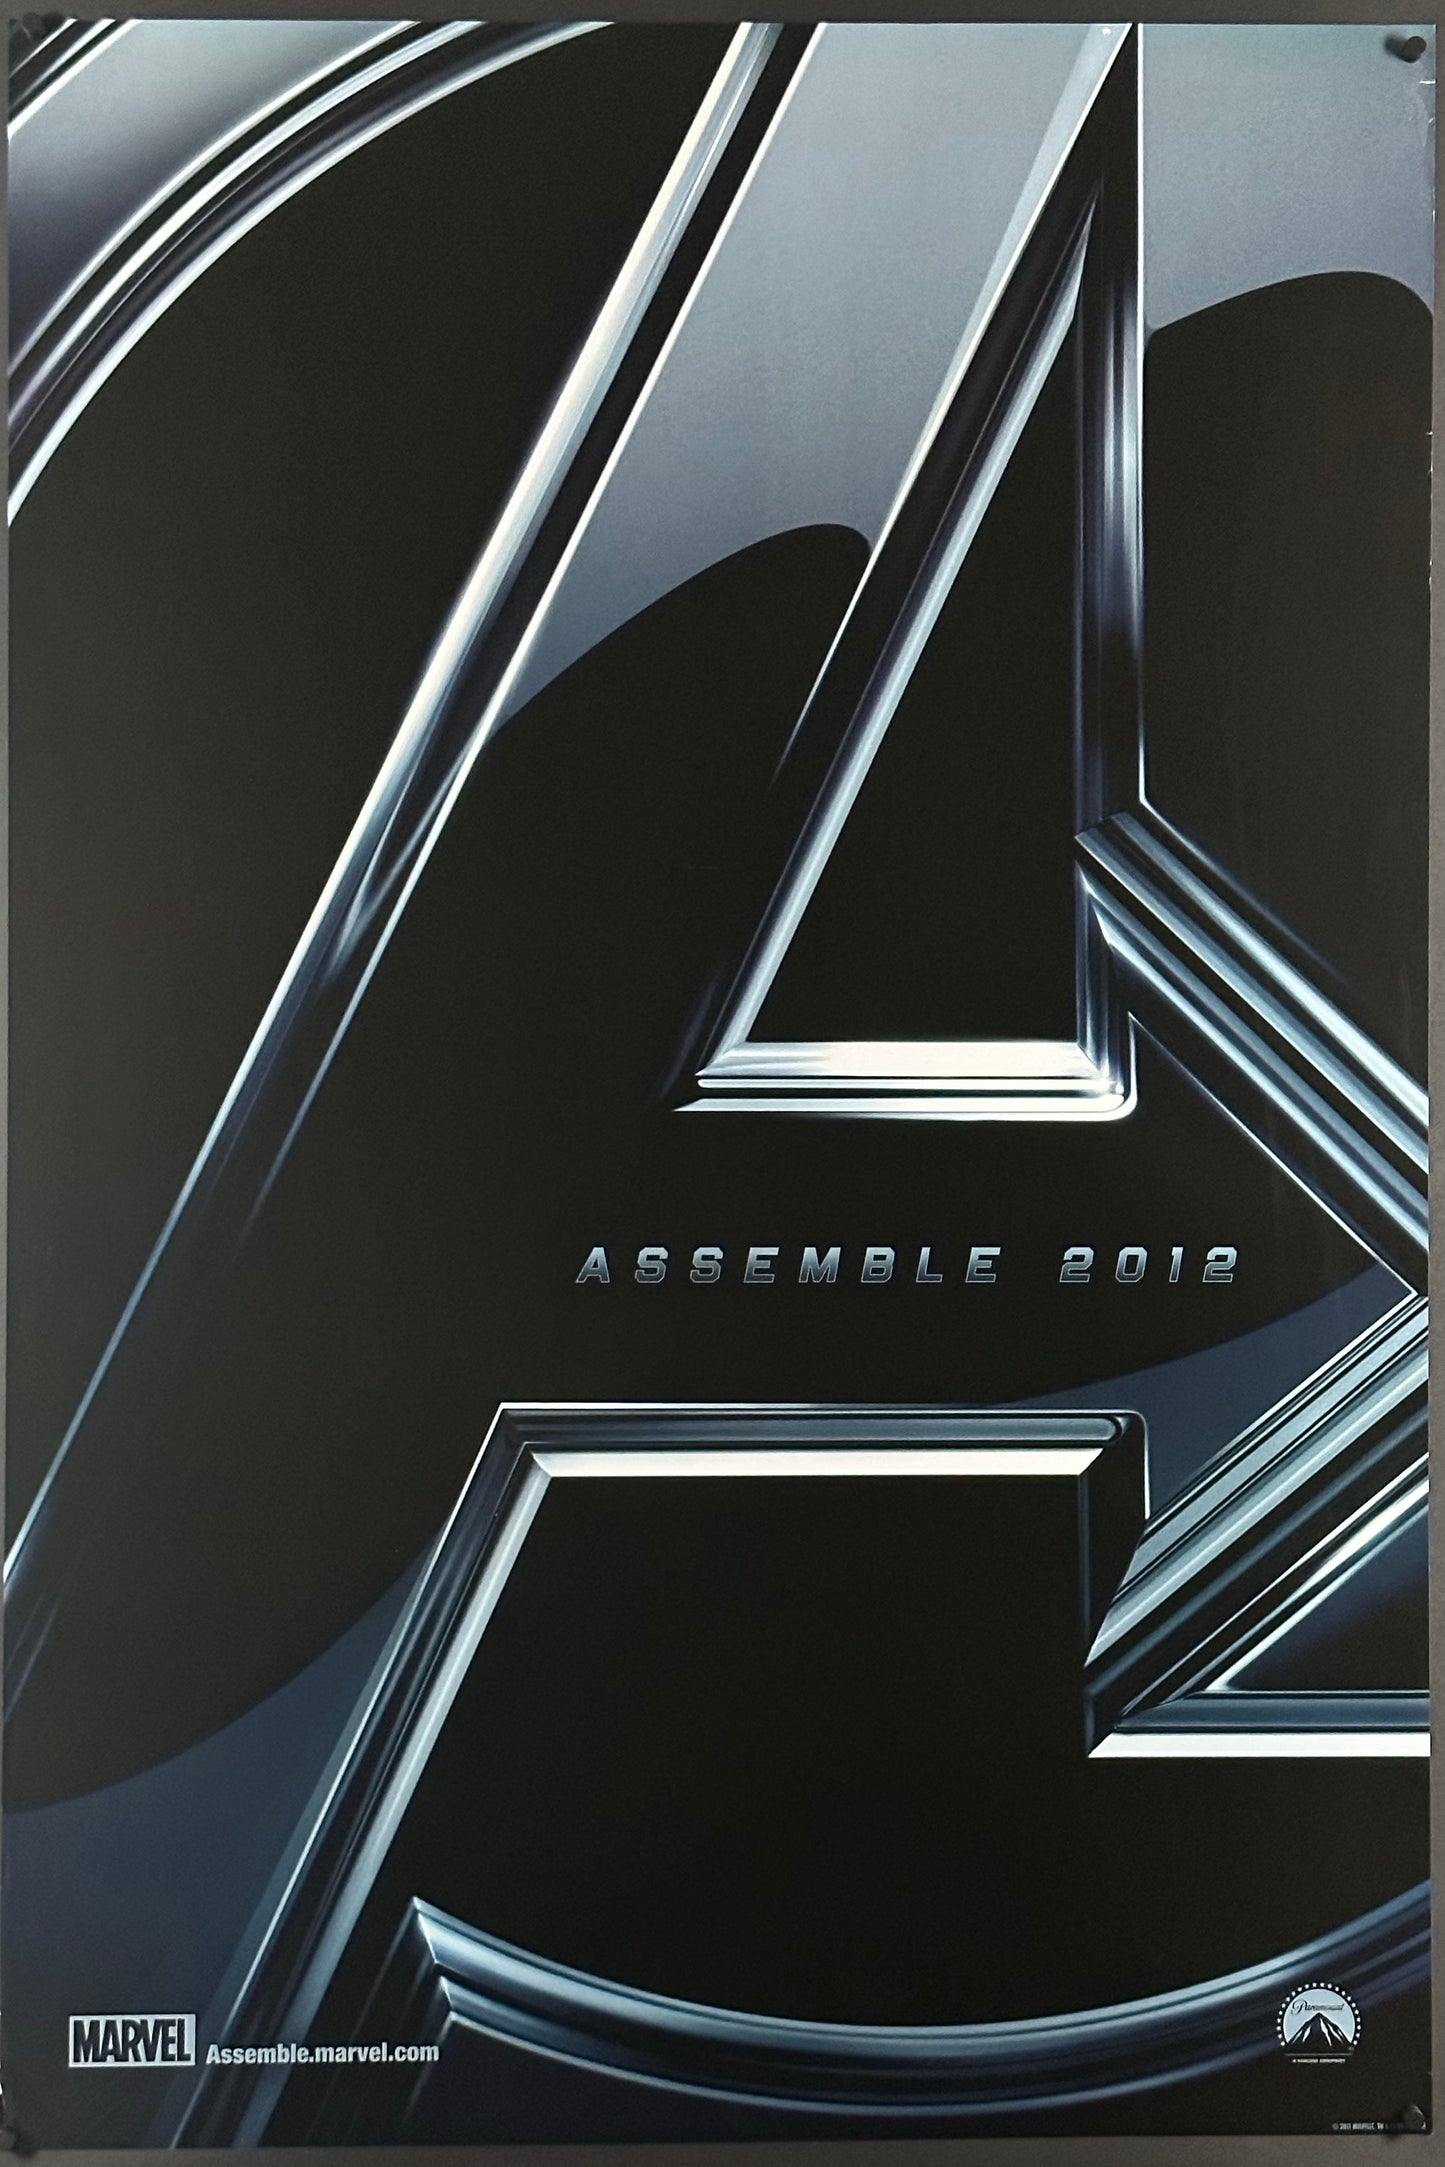 The Avengers US One Sheet Teaser Style (2012) - ORIGINAL RELEASE - posterpalace.com